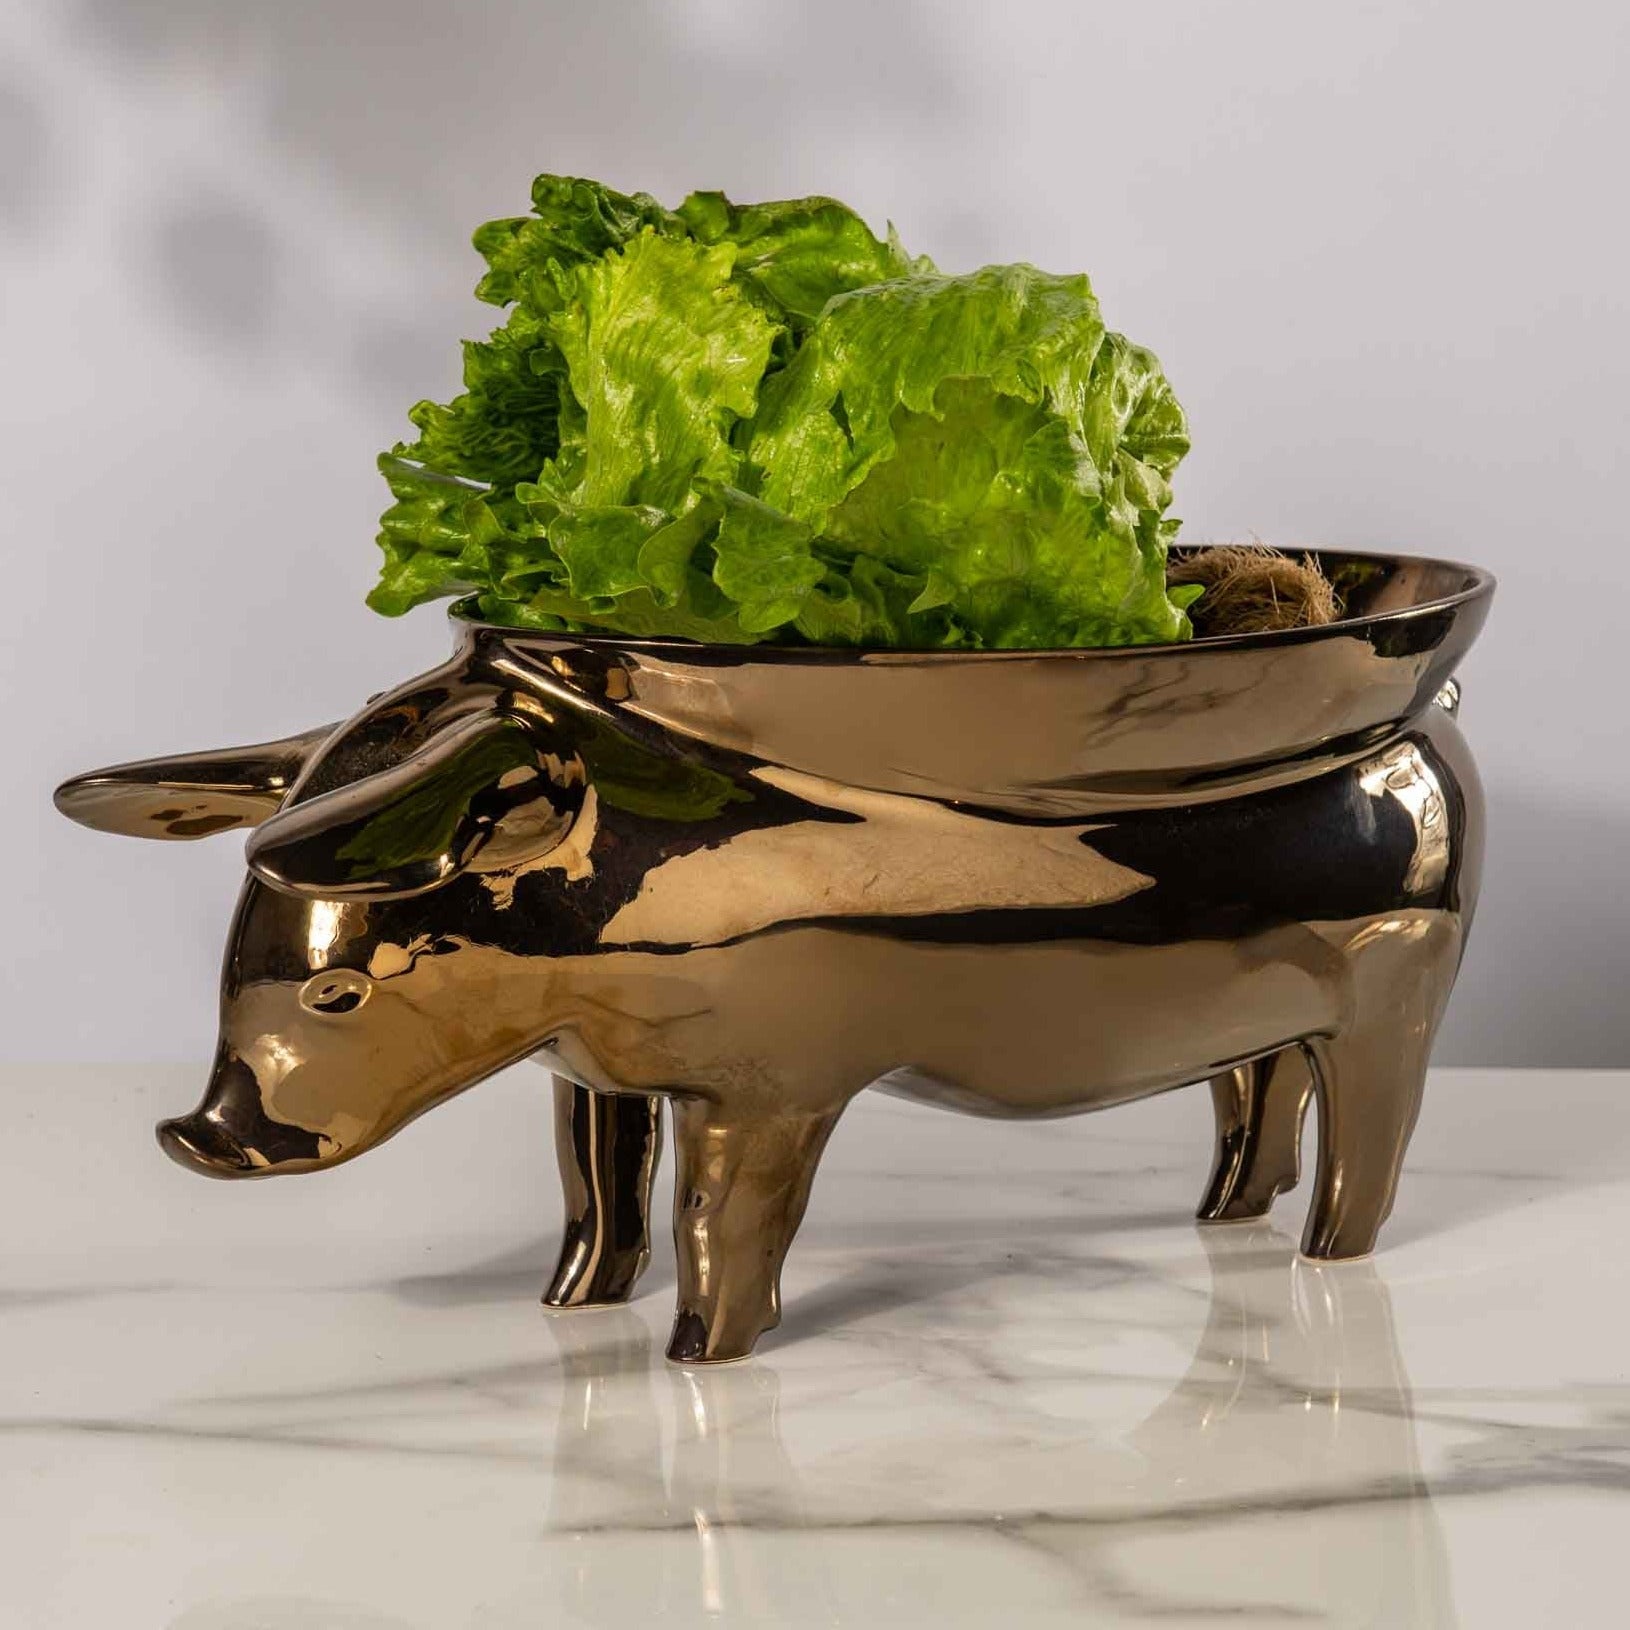 A white ceramic fruit bowl shaped like a pig, with intricate details and a curved body, perfect for displaying fresh fruit or using as a unique centerpiece in any kitchen or dining room.